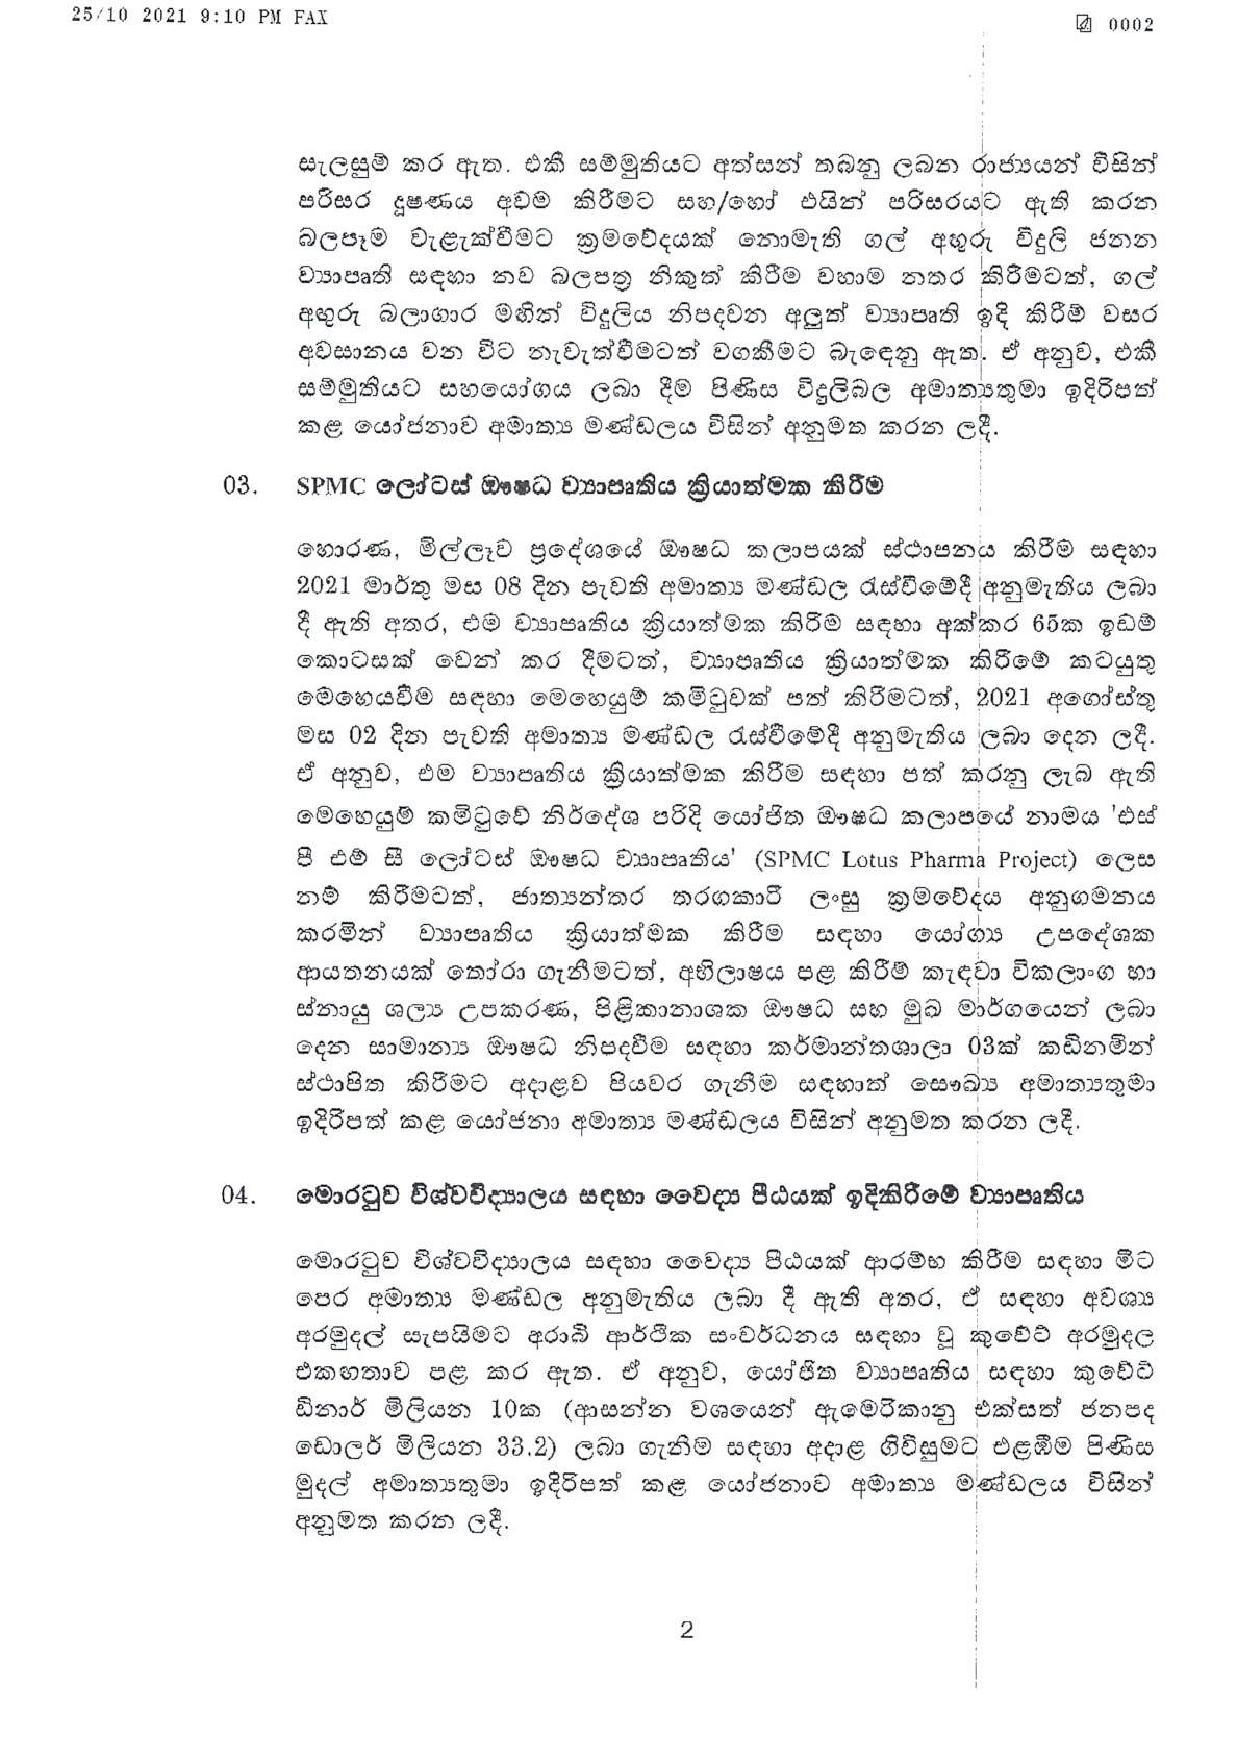 Cabinet Decisions on 25.10.2021 page 002